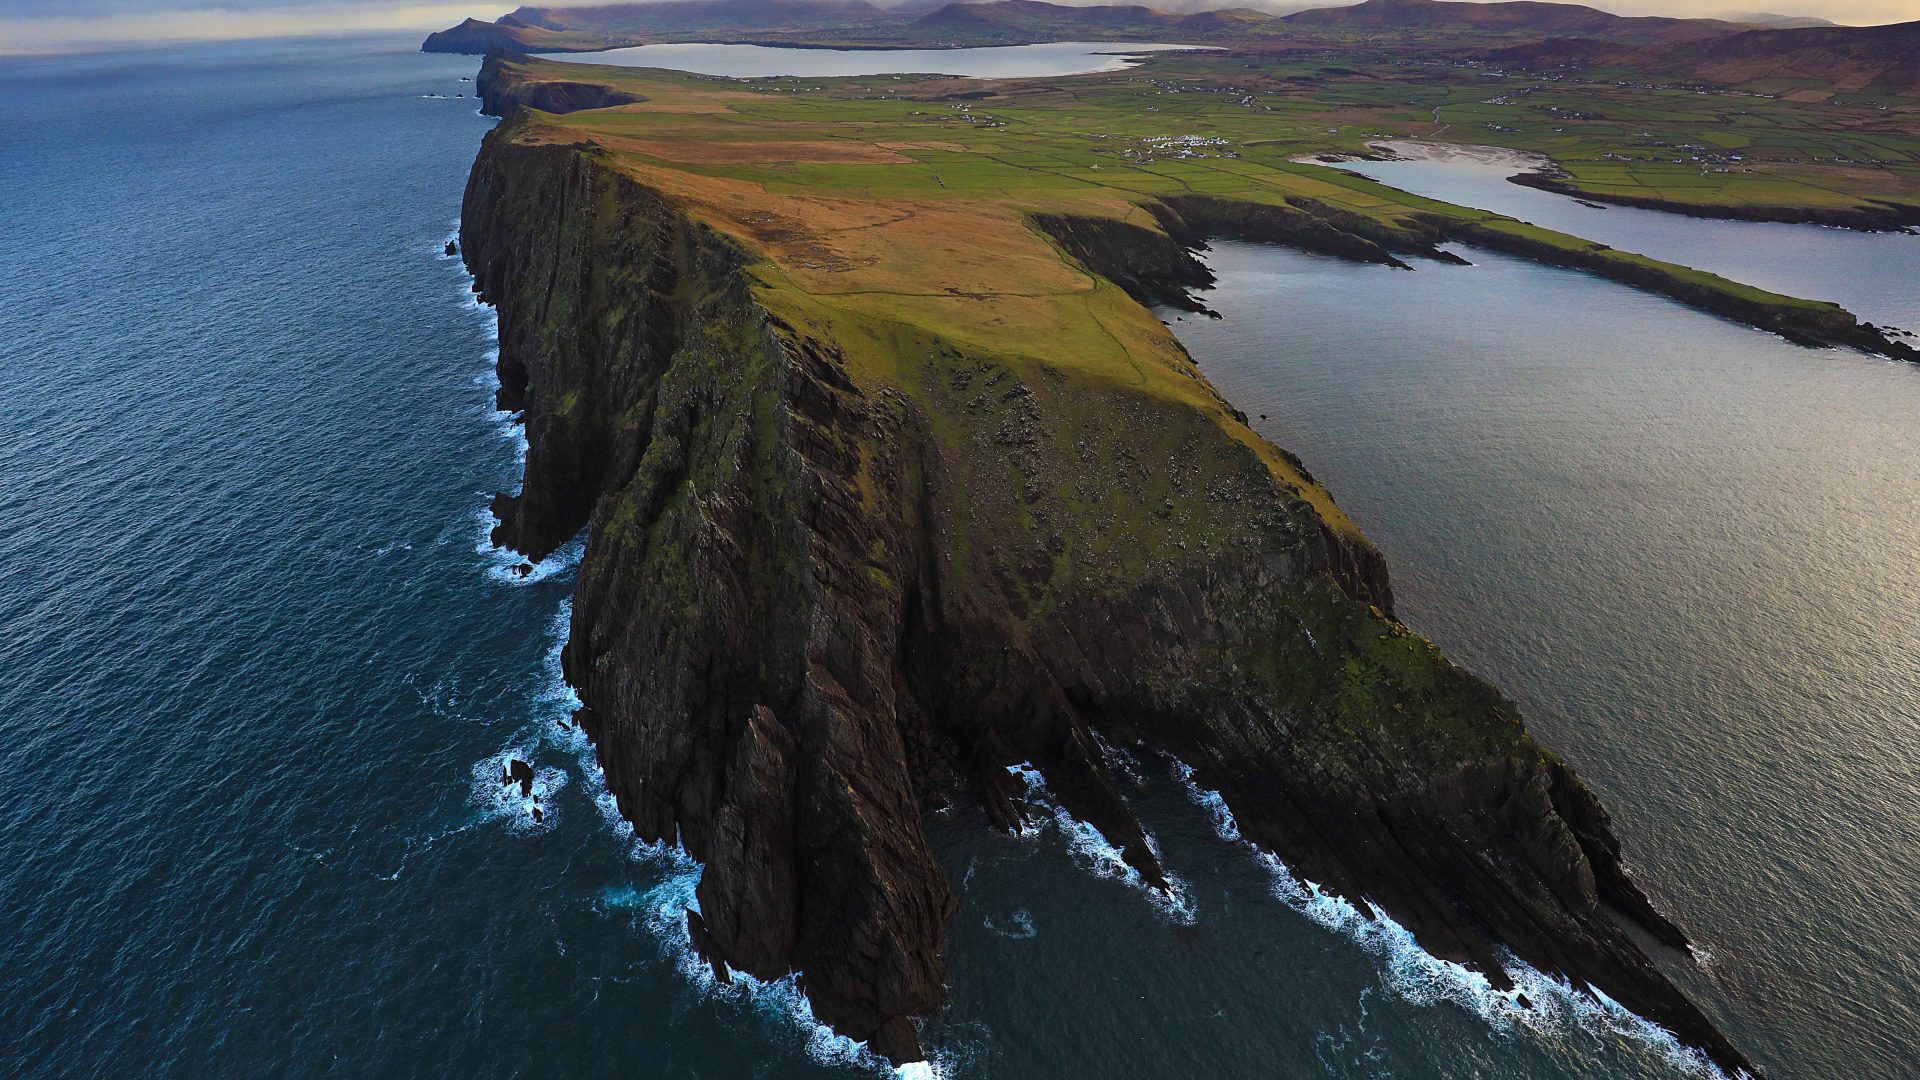 Location of Star Wars: The Last Jedi (also known as Star Wars: Episode VIII – The Last Jedi)  written and directed by Rian Johnson. It is the second film in the Star Wars sequel trilogy.Ceann Sibéal or Sybil's Head, on the Dingle Peninsula, Co Kerry. Replicating the The monastic Island of Skellig Michael which was founded in 588 by Saint Fionán, for 600 years the island was a centre of monastic life for Irish Christian monks. located 12 kilometres off the coast County Kerry’s Inveragh Peninsula. Skellig Michael is the most spectacular of all the early medieval island monastic sites. The monastery consisting of six beehive huts, is situated almost at the summit of the 230-metre-high rock. It became a UNESCO World Heritage Site in 1996 and is one of Europe's better known but least accessible monasteries. Skellig Michael is the most spectacular of all the early medieval island monastic sites. Skellig Michael (Sceilig Mhicíl in Irish) and Great Skellig. The word Scellic means a steep rock.Photo:Valerie O’Sullivan/FREE PIC/REPRO FREE;